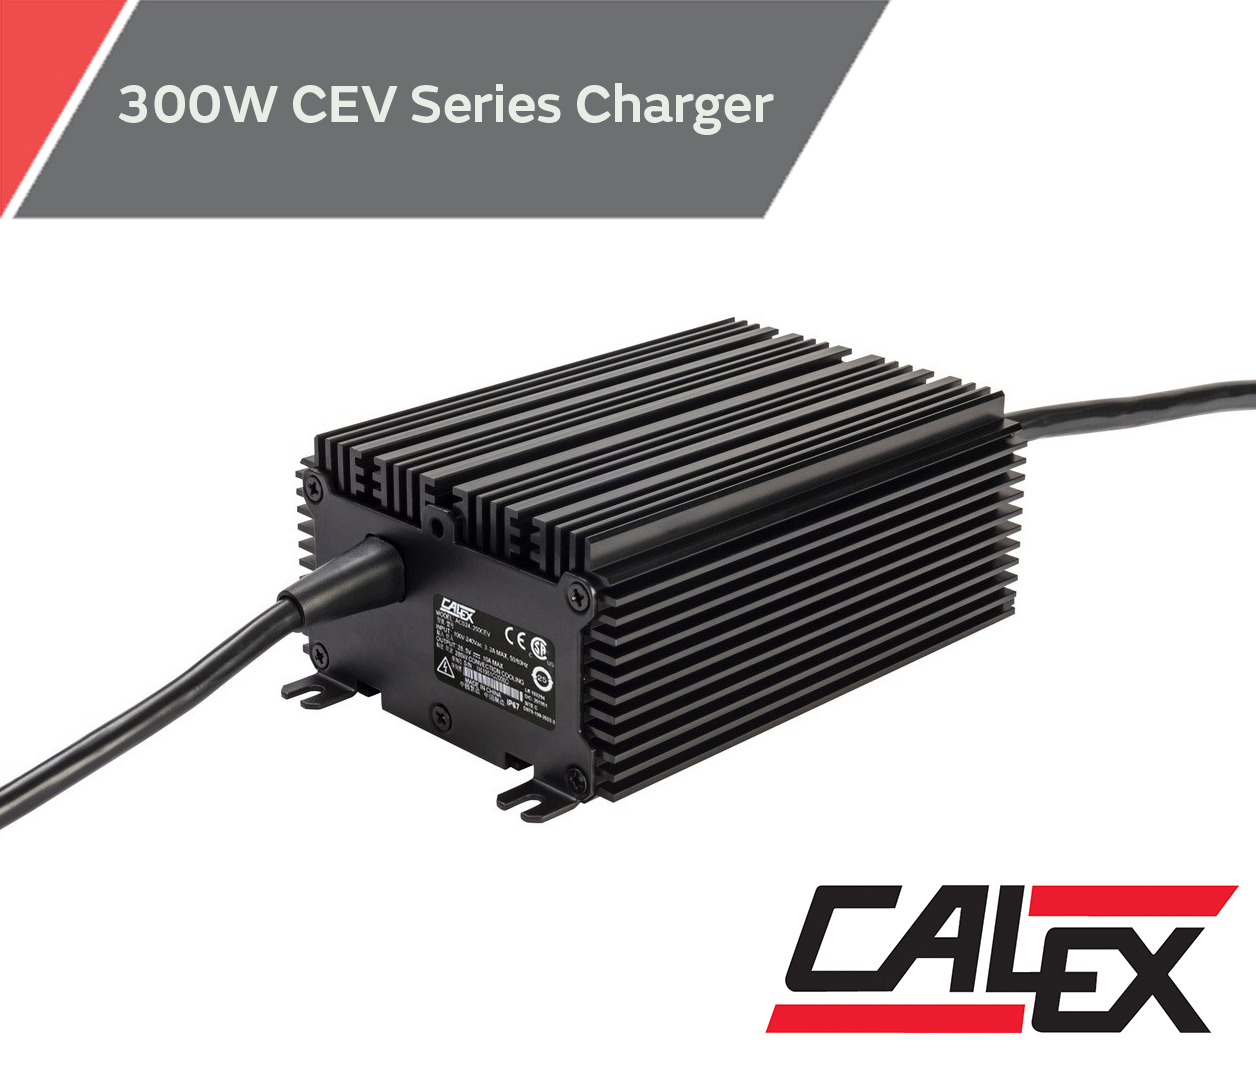 300W Li-ion Battery Charger Meets IP67 Standards